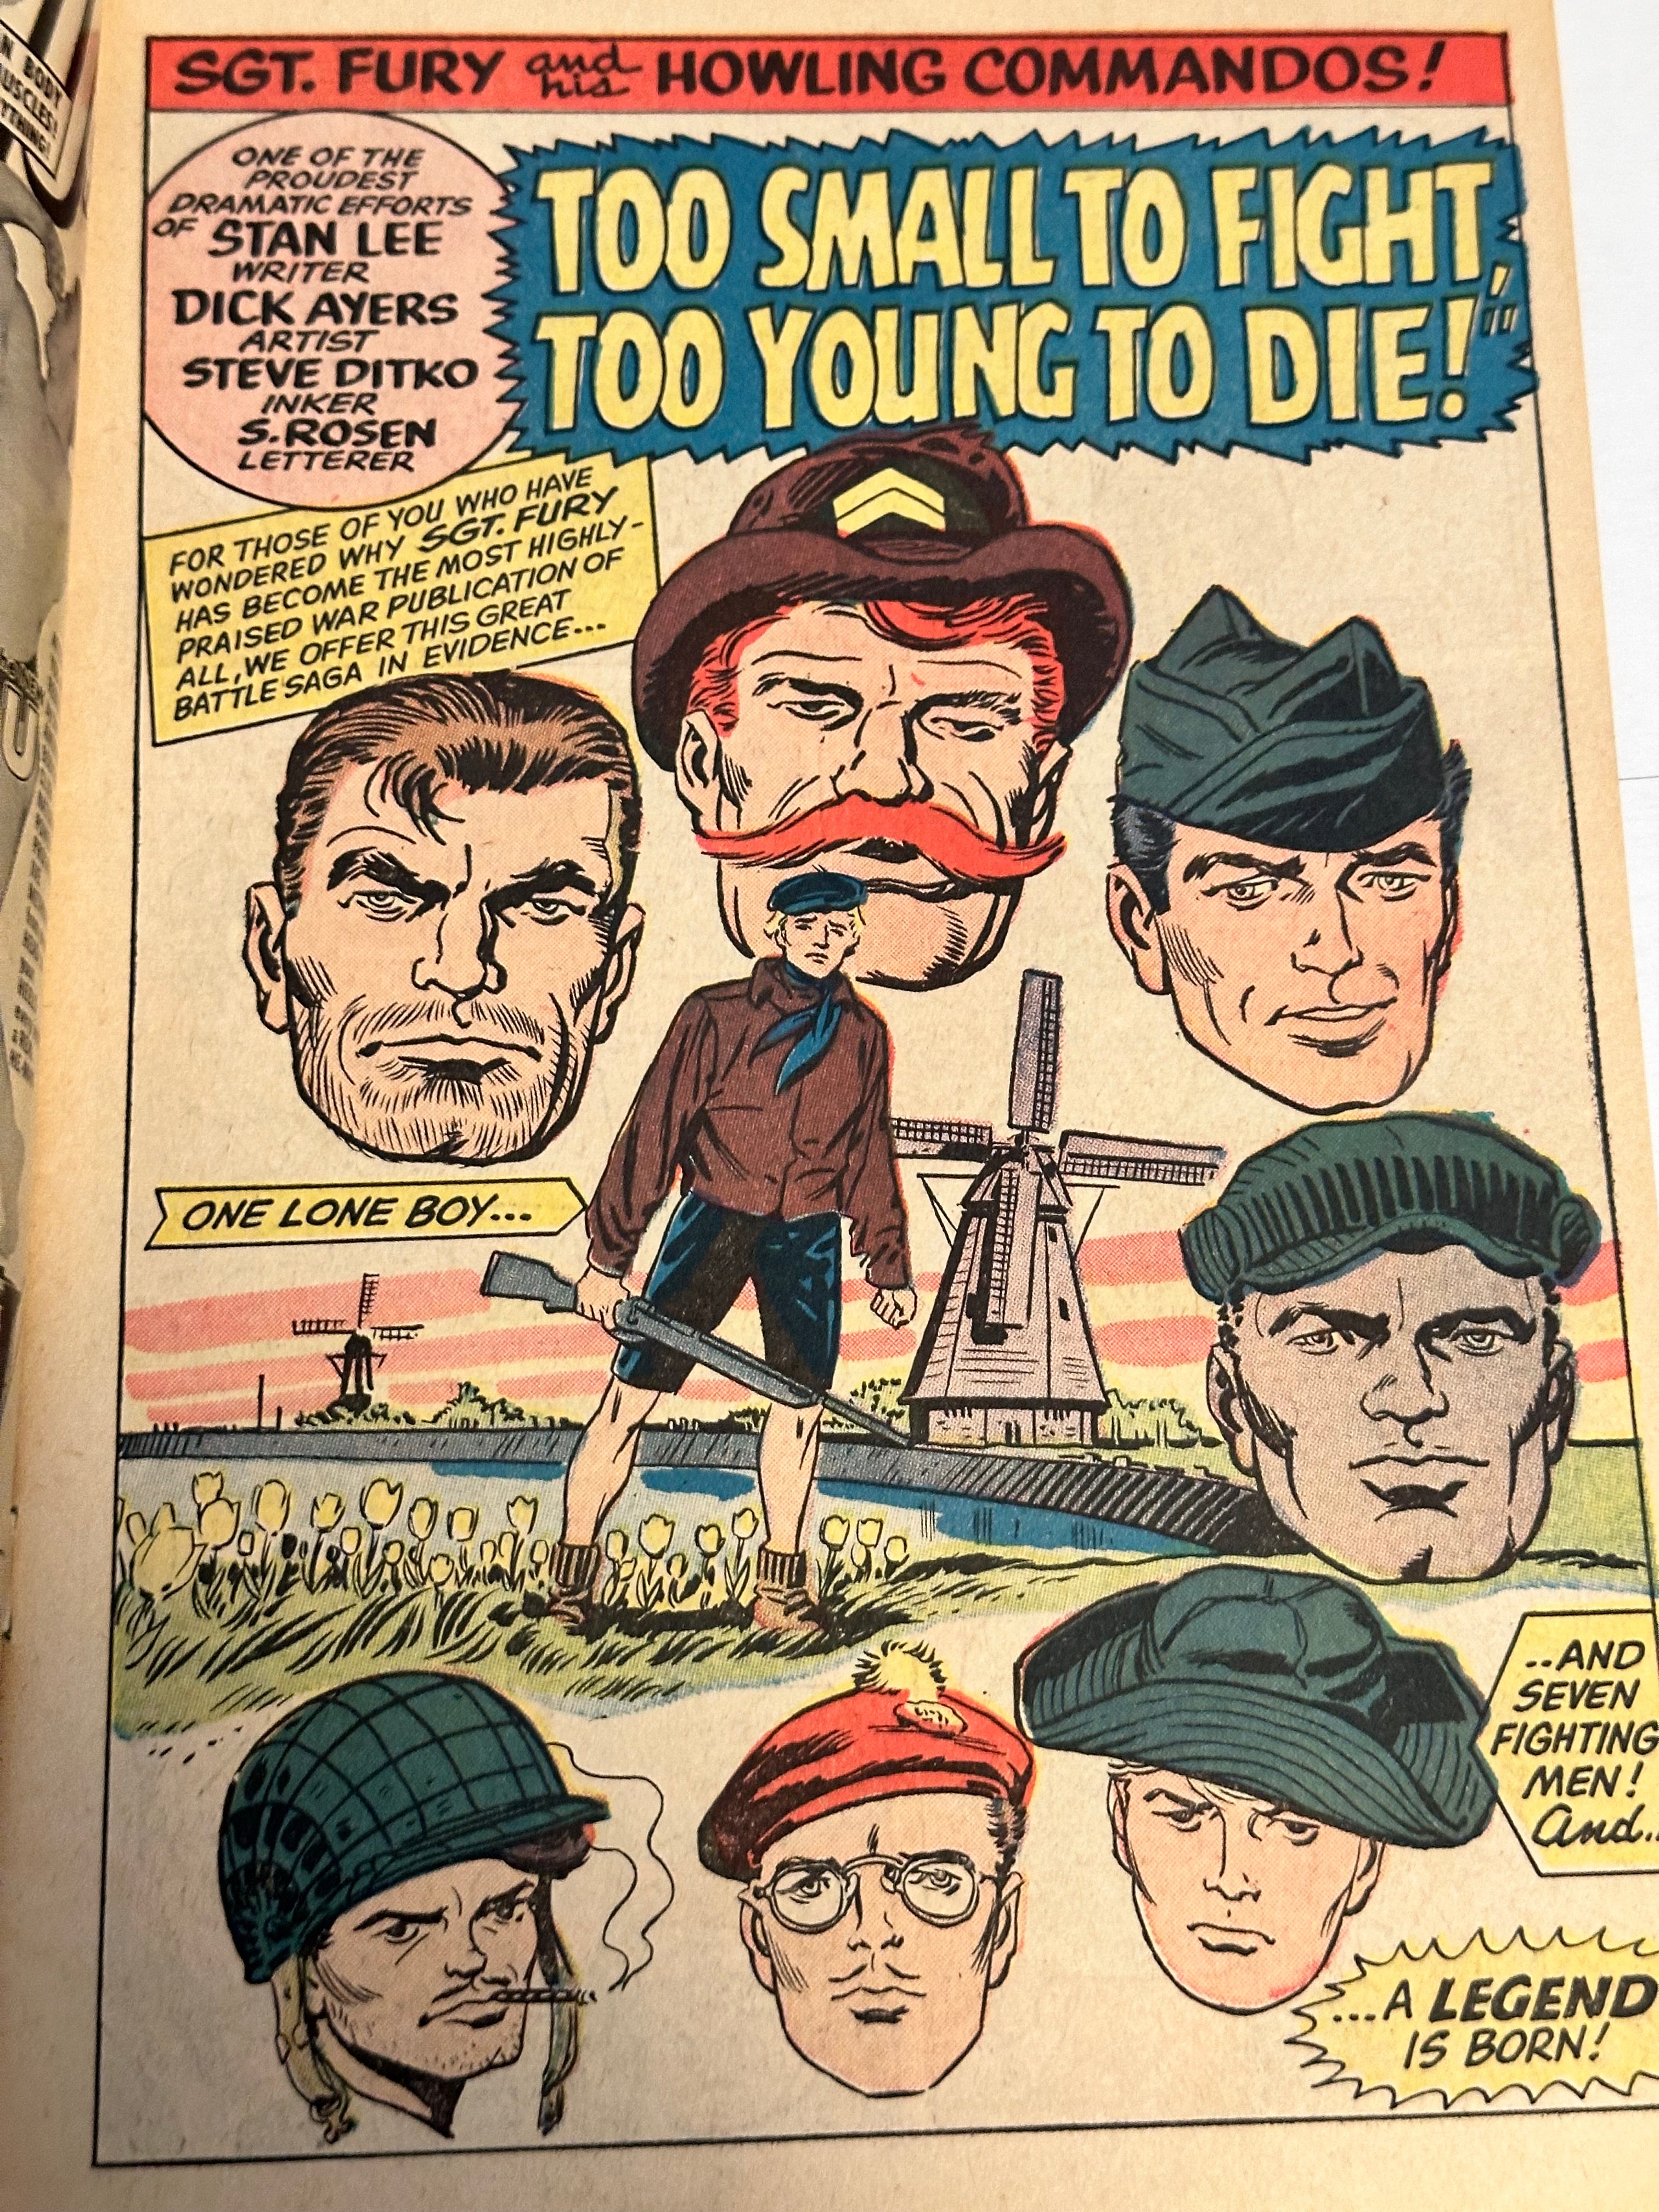 Sgt. Fury and his howling commandoes #15 high grade comic book 1965